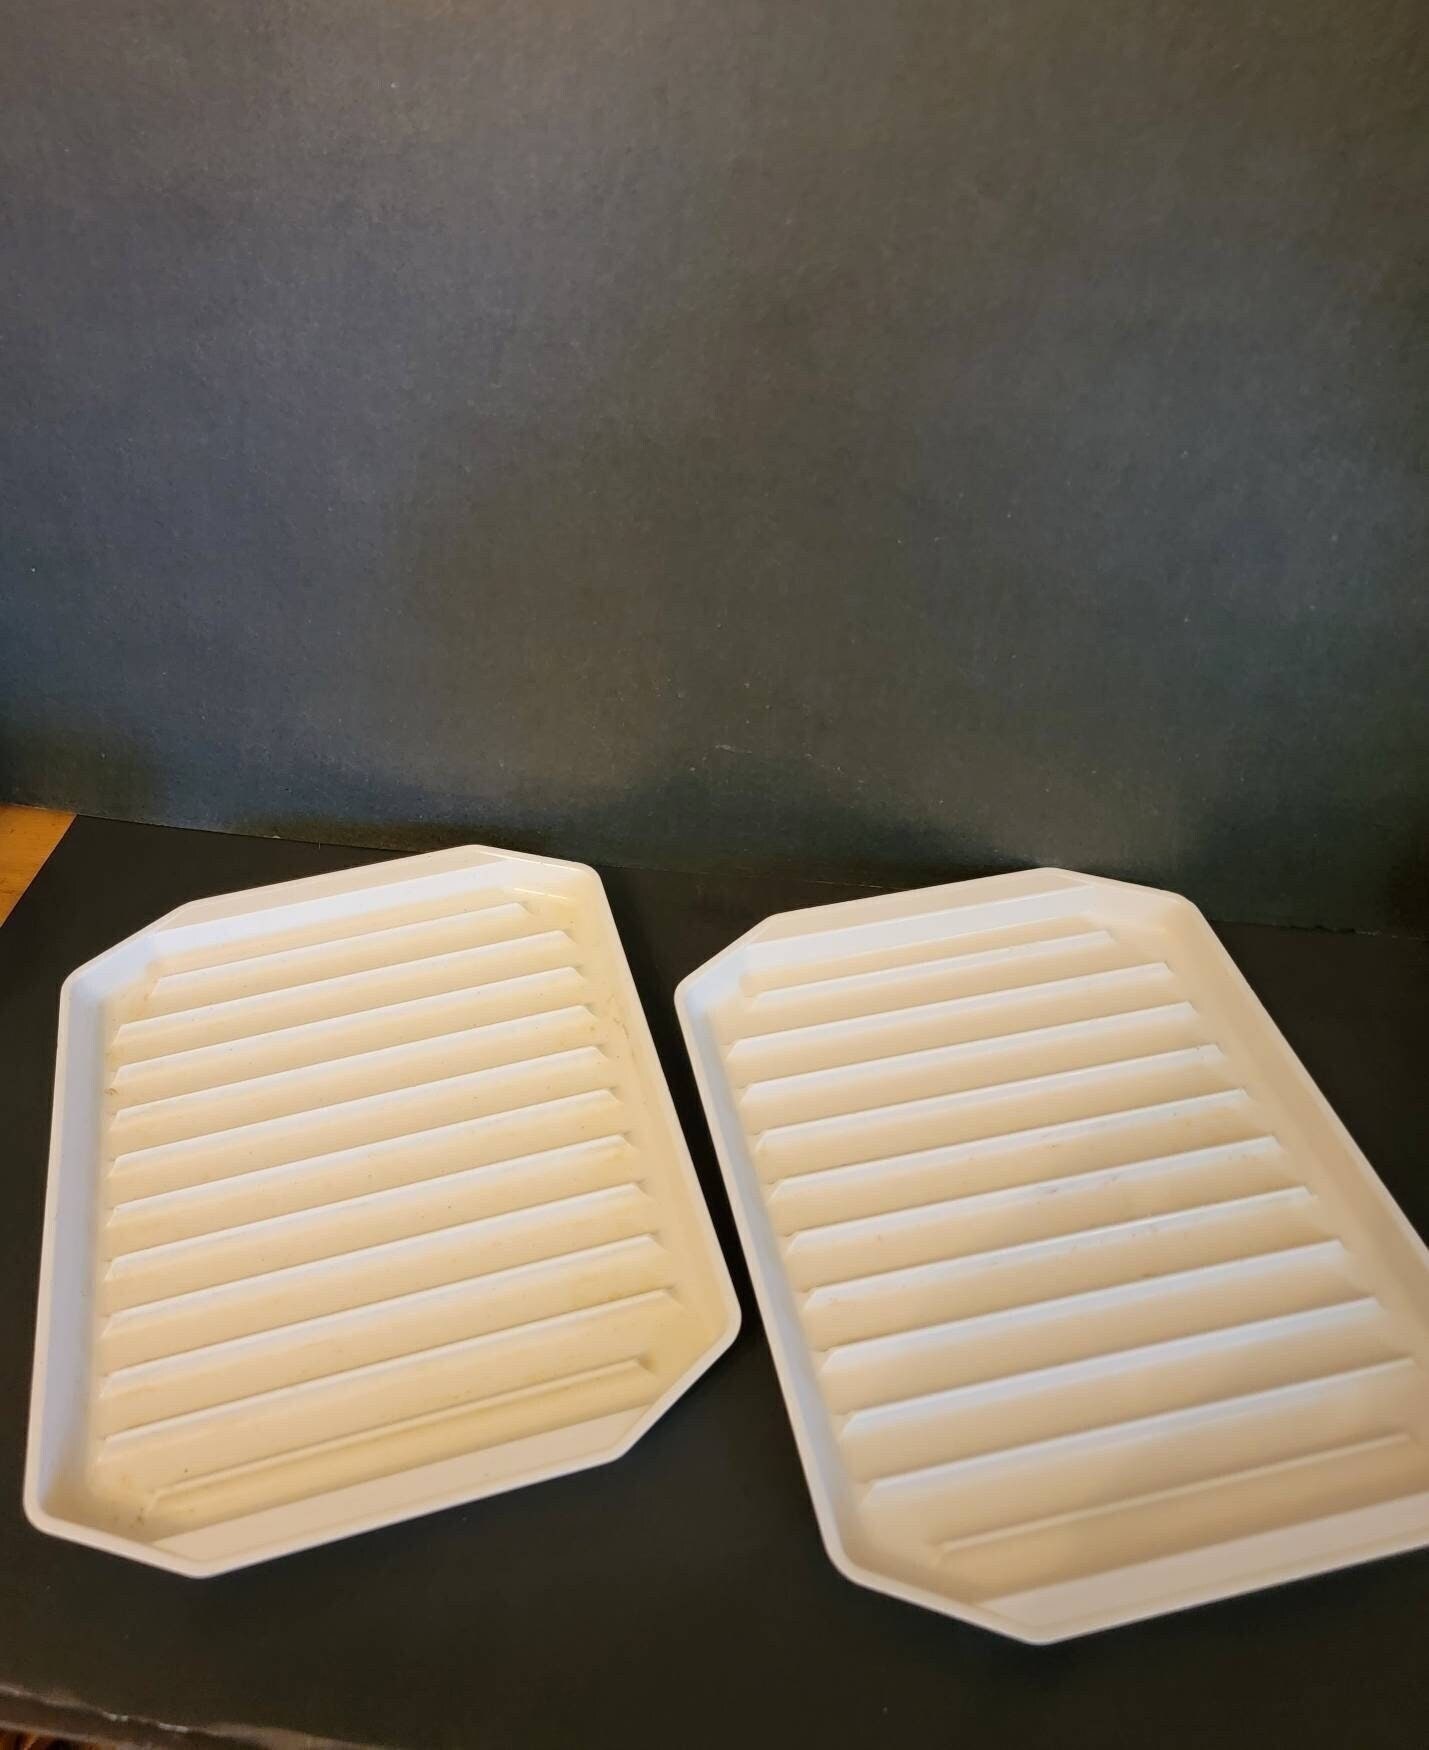 2 Vintage Nordic Ware Compact Bacon Rack Tray Freeze Heat Serve 104  Plastics Inc. Microwave. Conventional Oven 